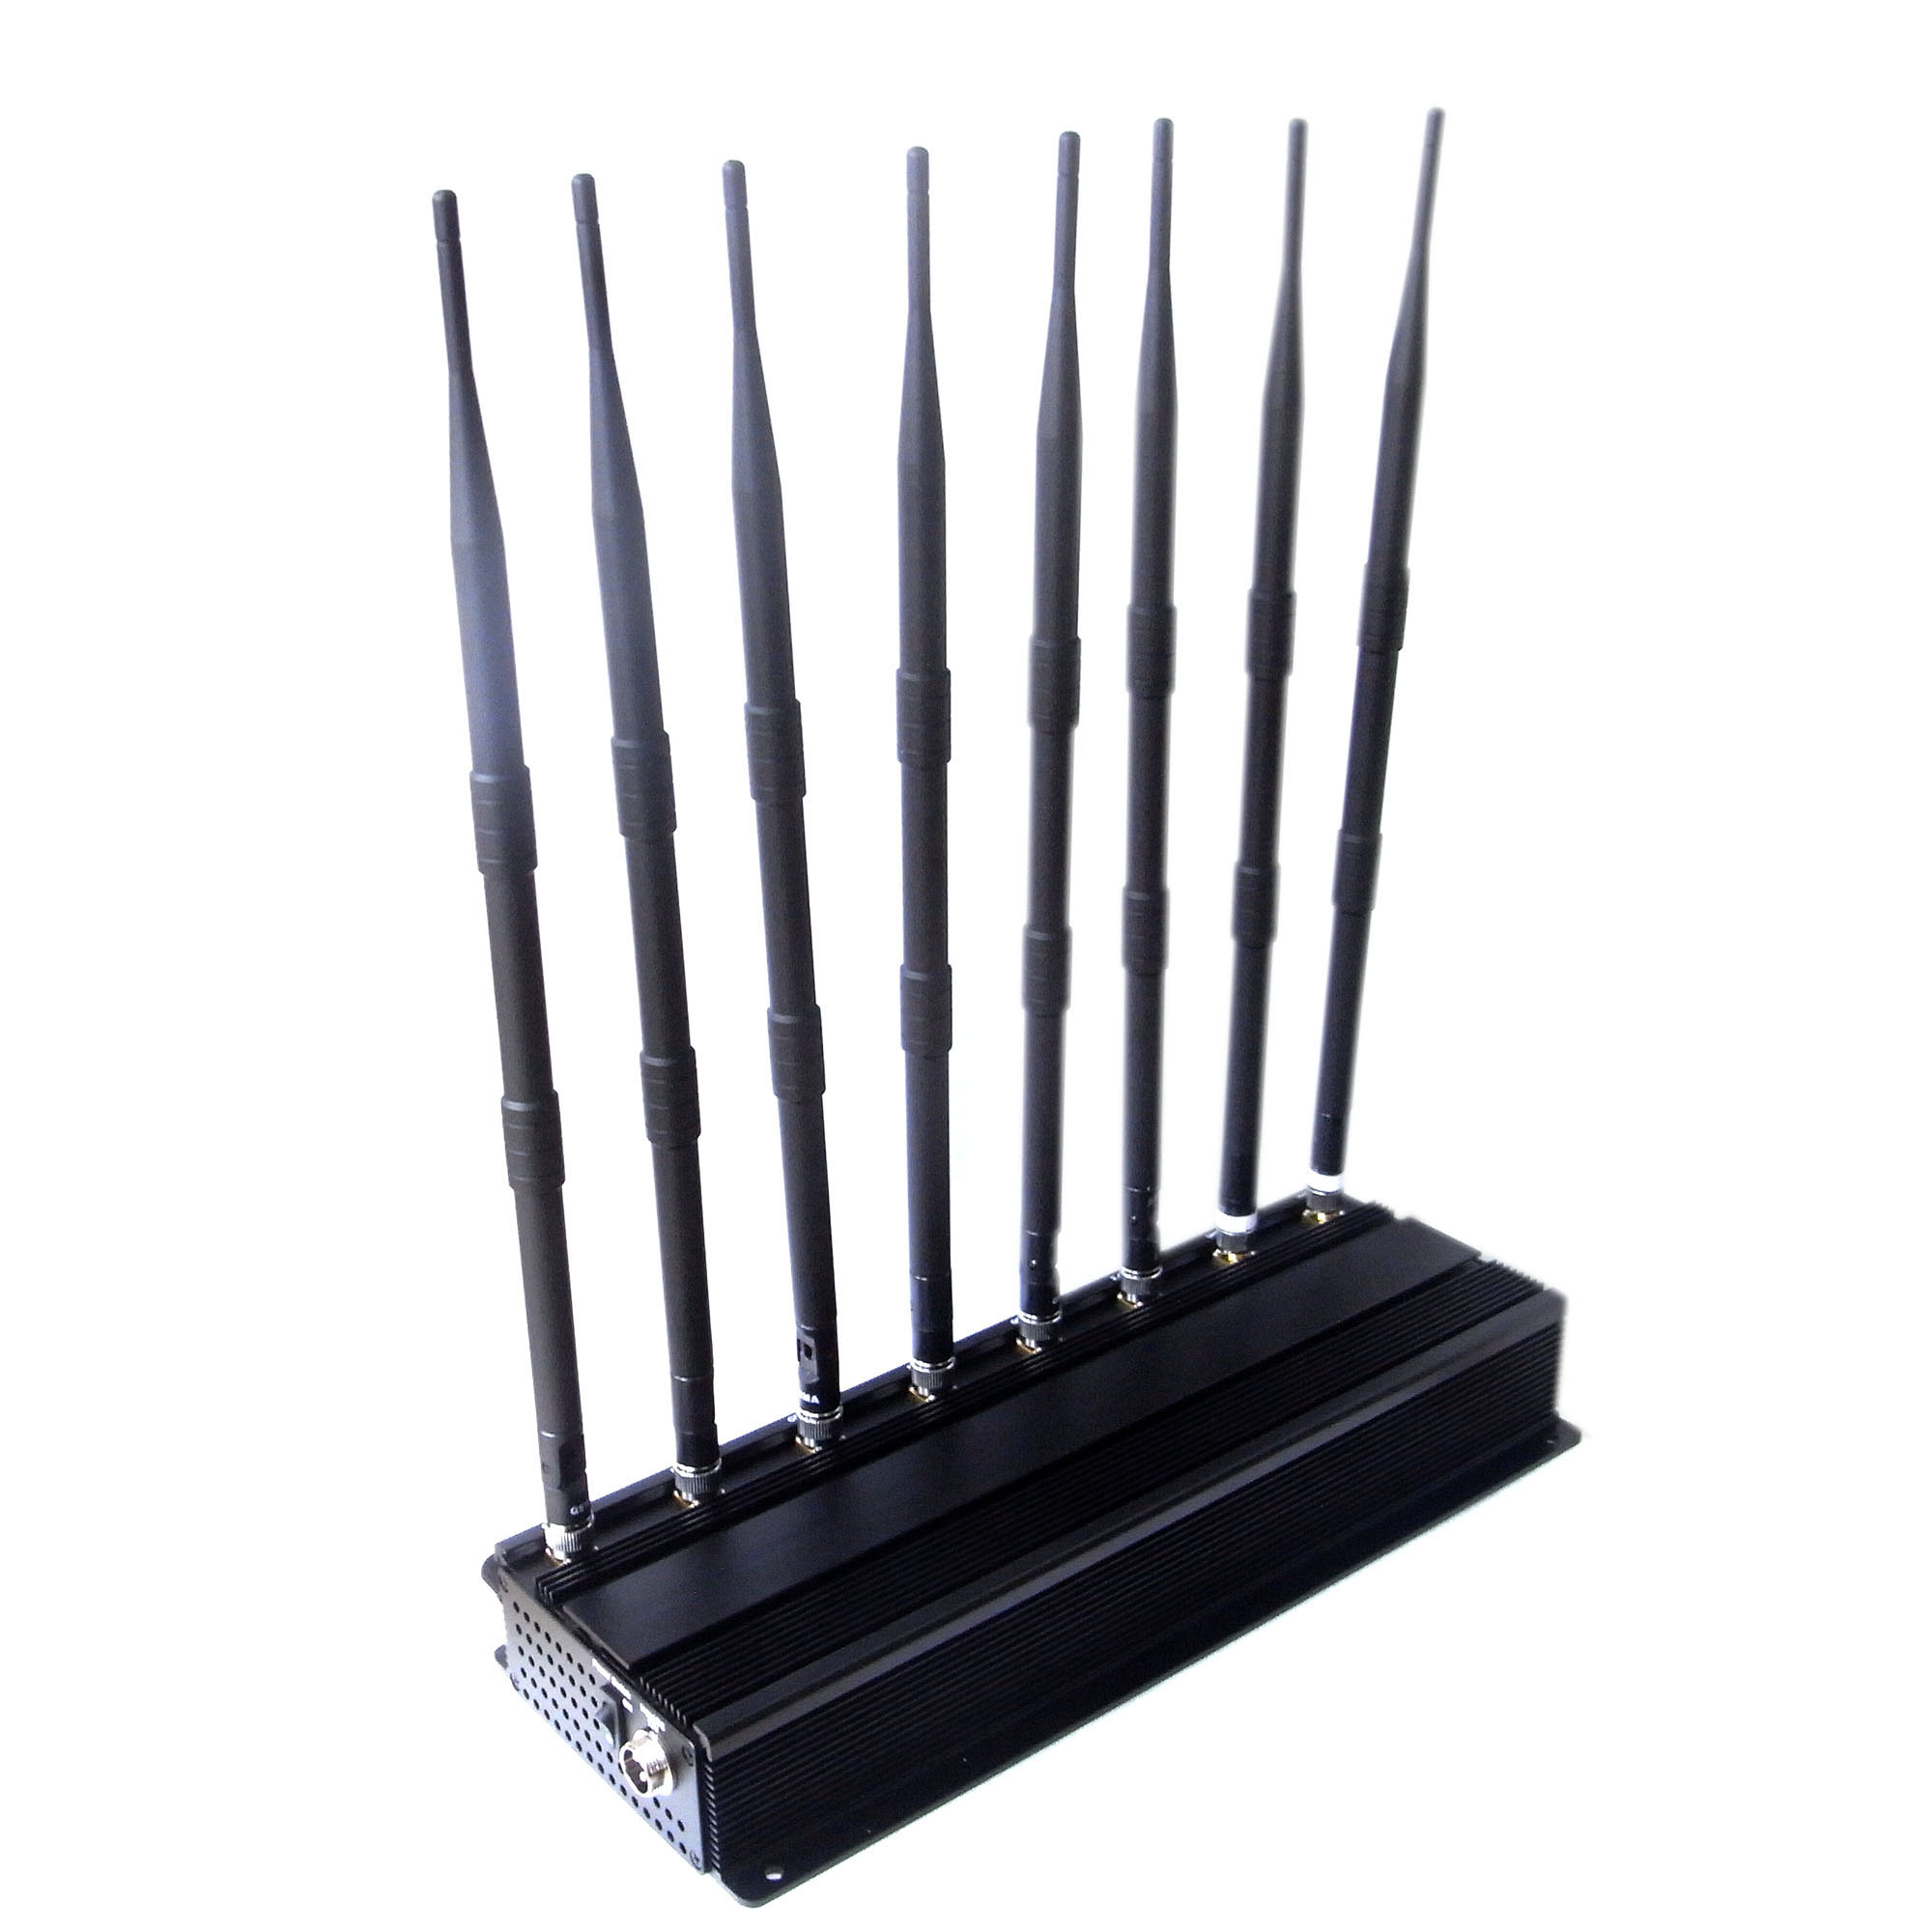 jammer legal education requirements | High Quality Wi-Fi Signal Jammer 8 Antennas Adjustable 3G 4G Phone Signal Blocker With 2.4G 5.8G